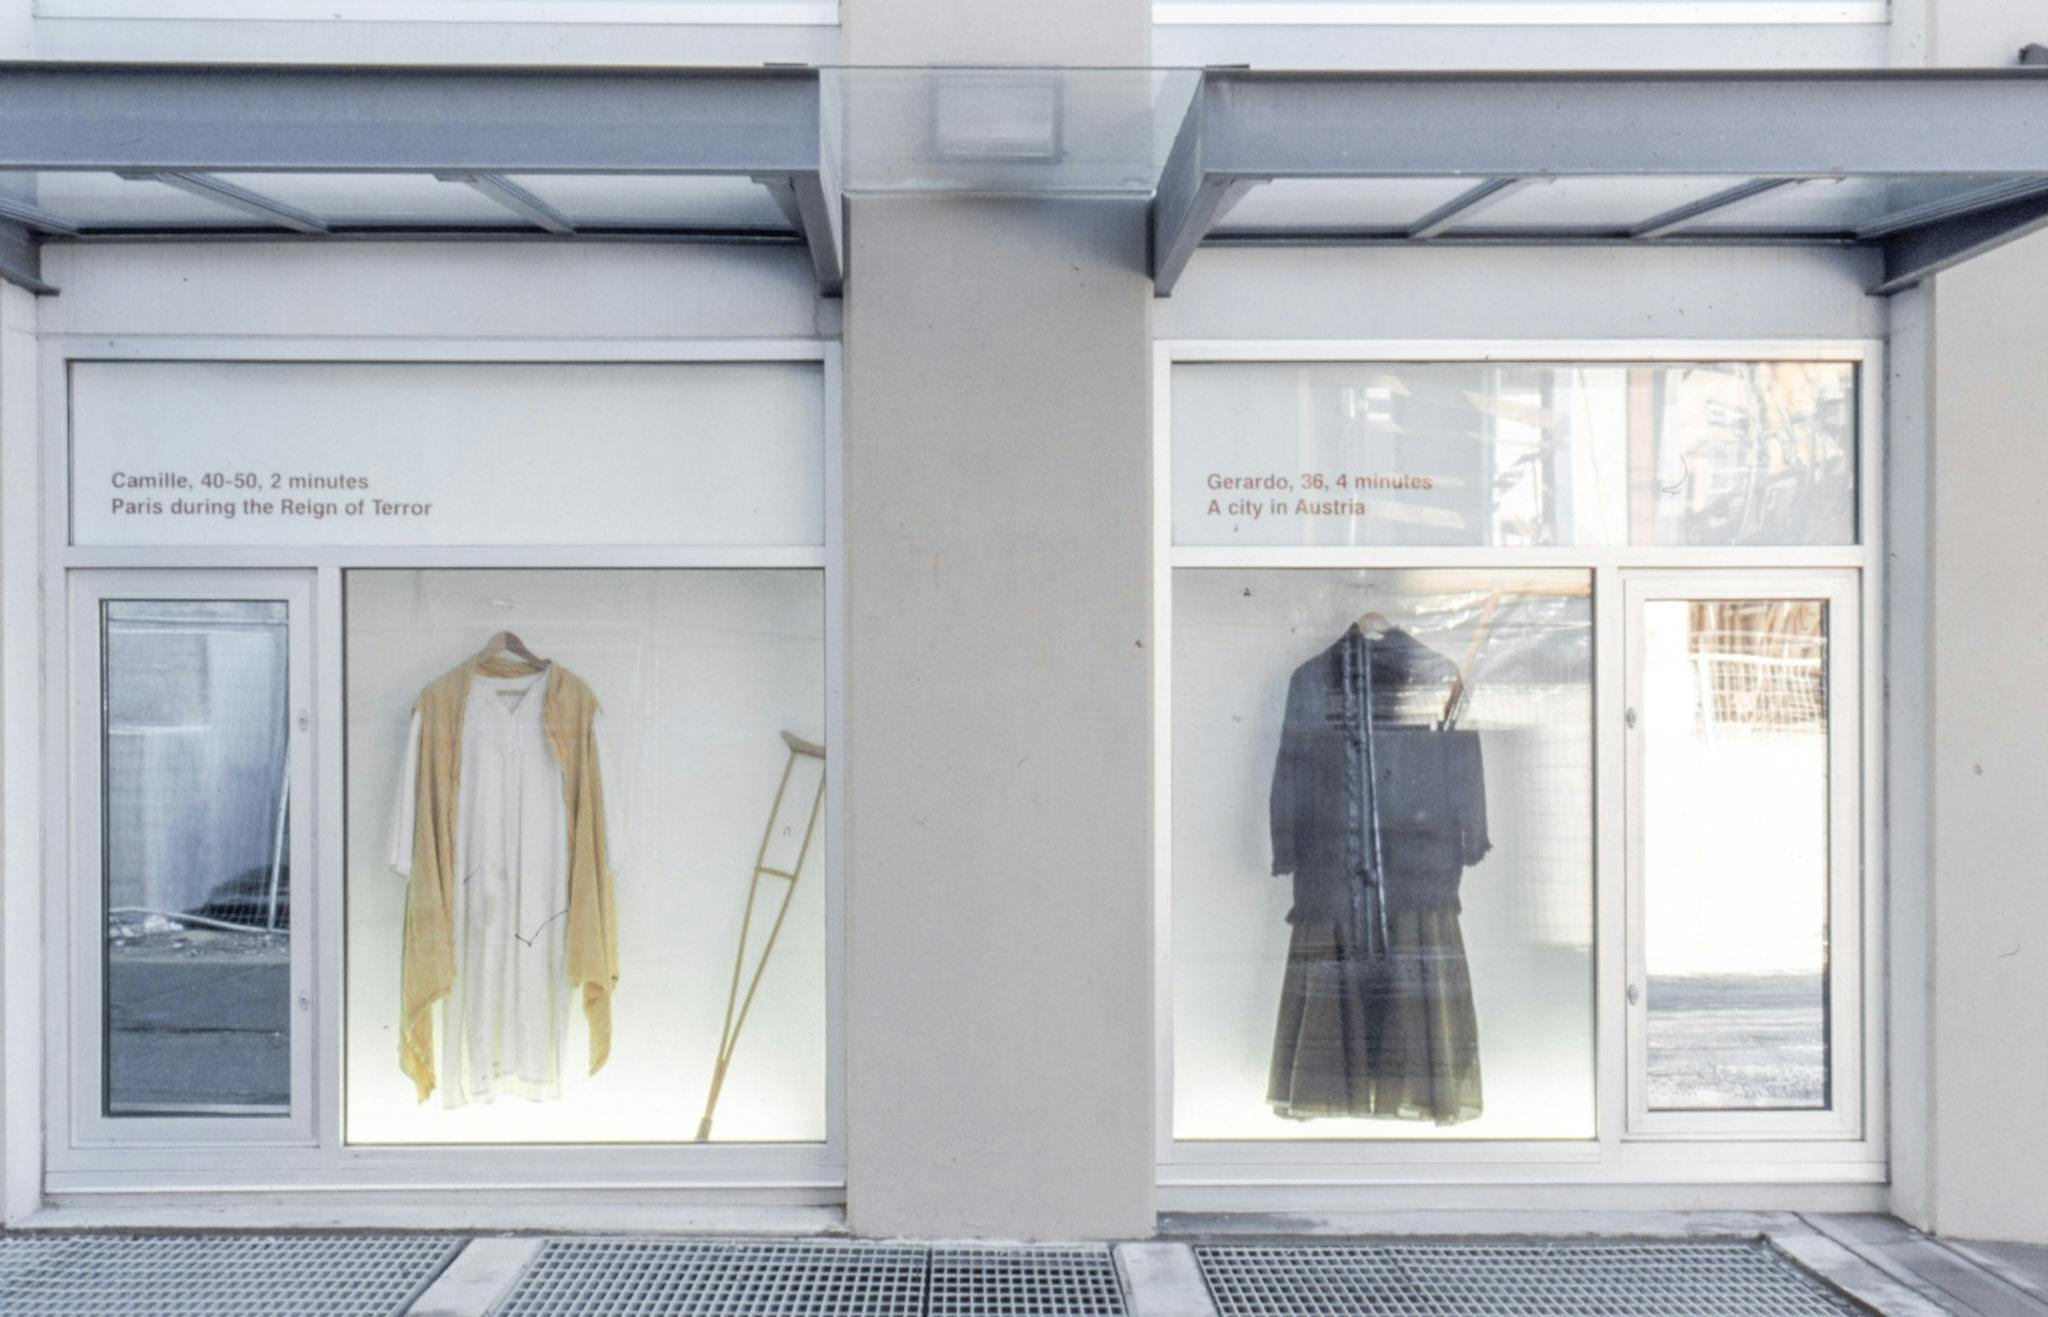 Various outfits are displayed in CAG’s window spaces. Above the installation of a dark-coloured outfit, there is a red text that says “The Gerardo 36, 4 minutes, A city in Austria.” 